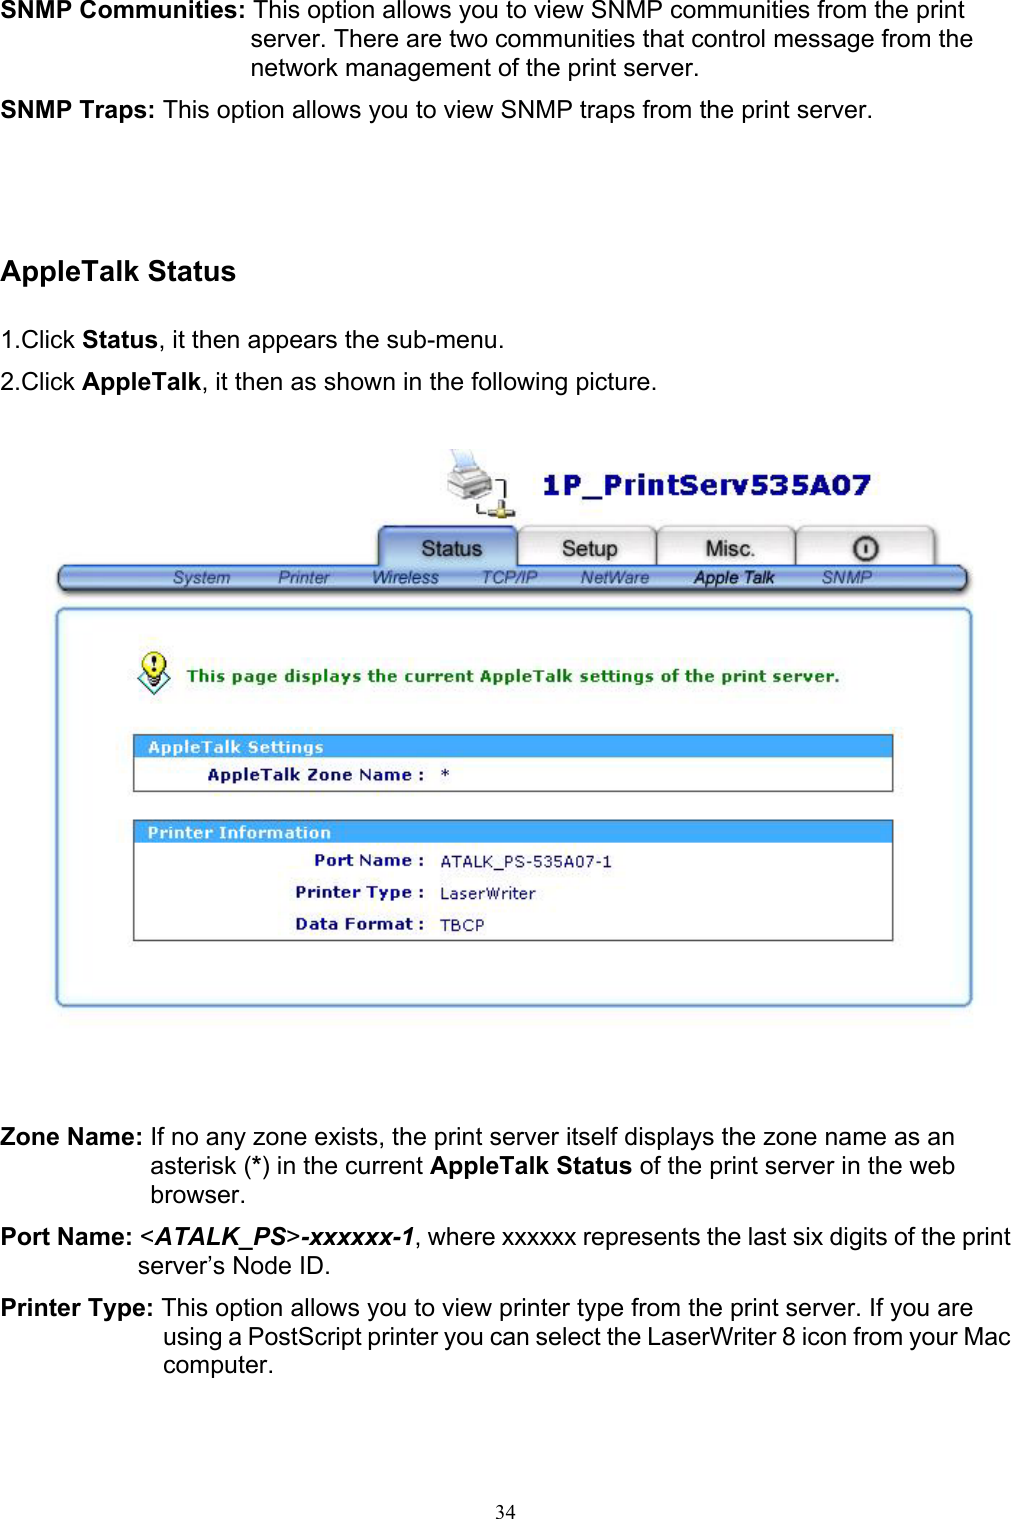   34SNMP Communities: This option allows you to view SNMP communities from the print server. There are two communities that control message from the network management of the print server. SNMP Traps: This option allows you to view SNMP traps from the print server.      AppleTalk Status  1.Click Status, it then appears the sub-menu. 2.Click AppleTalk, it then as shown in the following picture.      Zone Name: If no any zone exists, the print server itself displays the zone name as an asterisk (*) in the current AppleTalk Status of the print server in the web browser. Port Name: &lt;ATALK_PS&gt;-xxxxxx-1, where xxxxxx represents the last six digits of the print server’s Node ID. Printer Type: This option allows you to view printer type from the print server. If you are using a PostScript printer you can select the LaserWriter 8 icon from your Mac computer. 